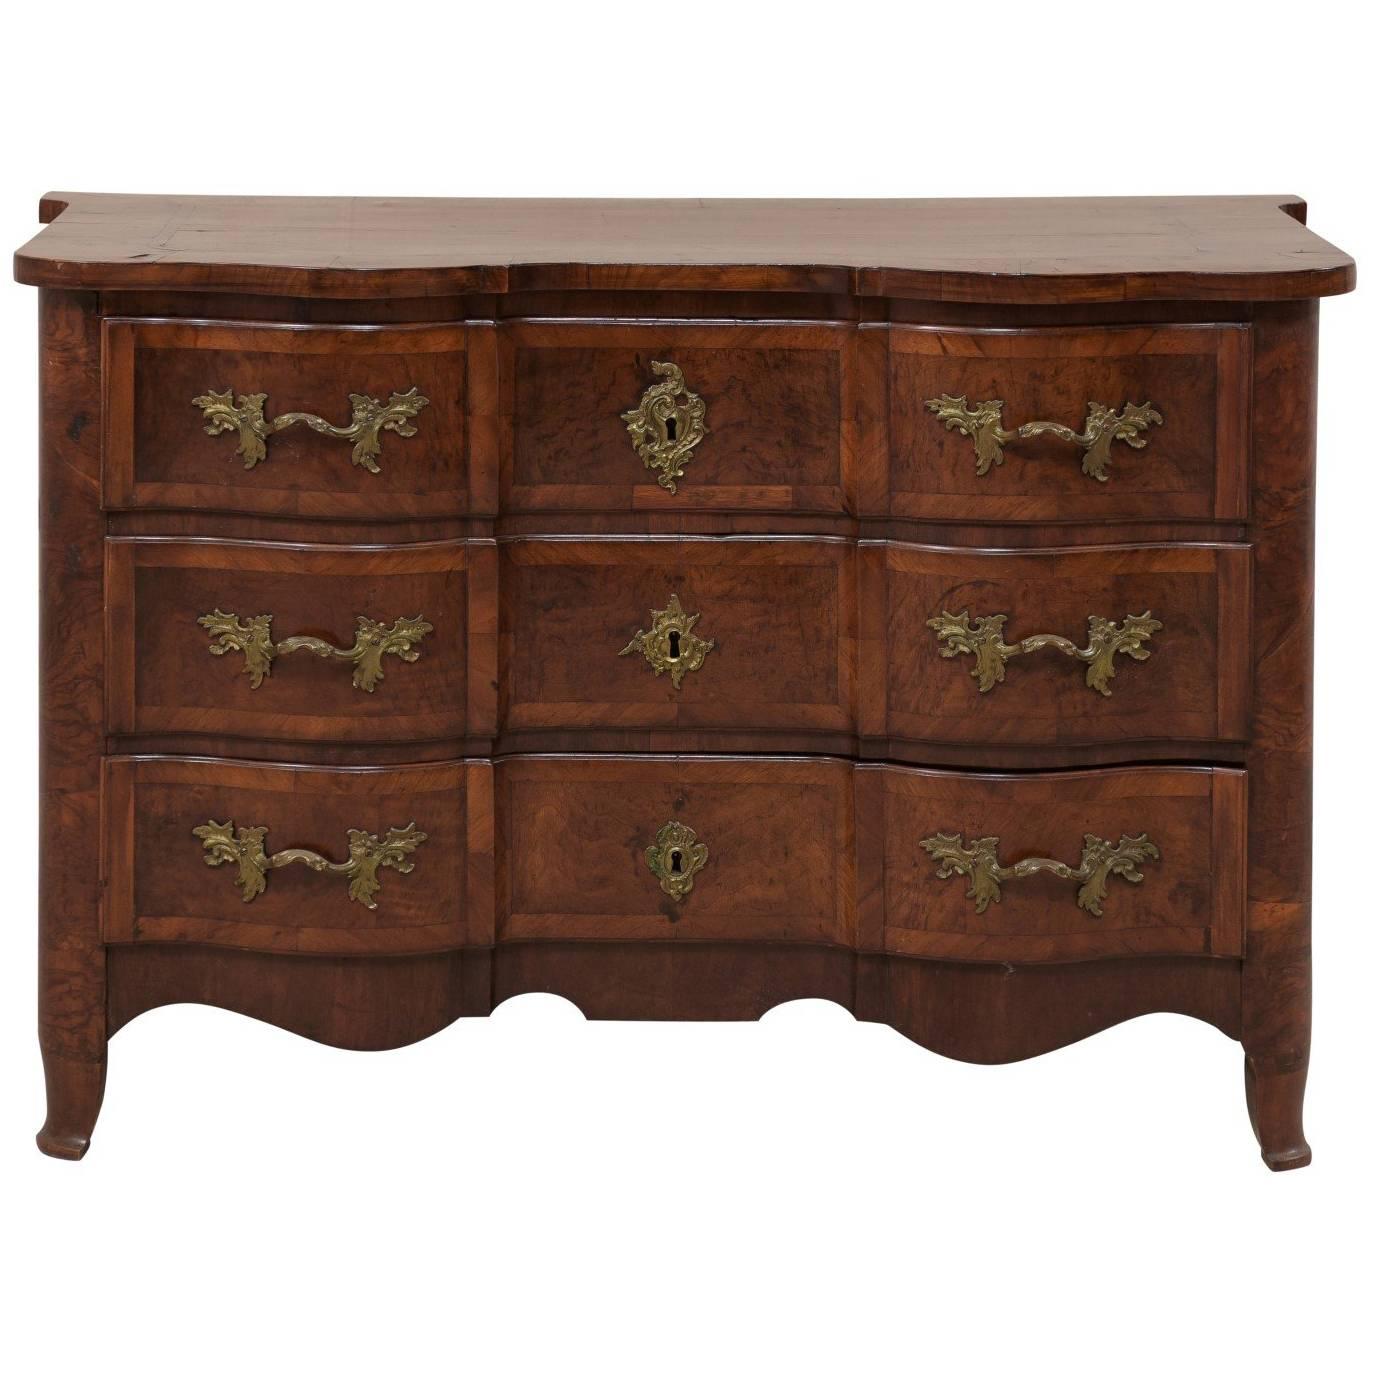 Period Baroque Swedish Wood Chest with Serpentine Front, circa 1725 For Sale